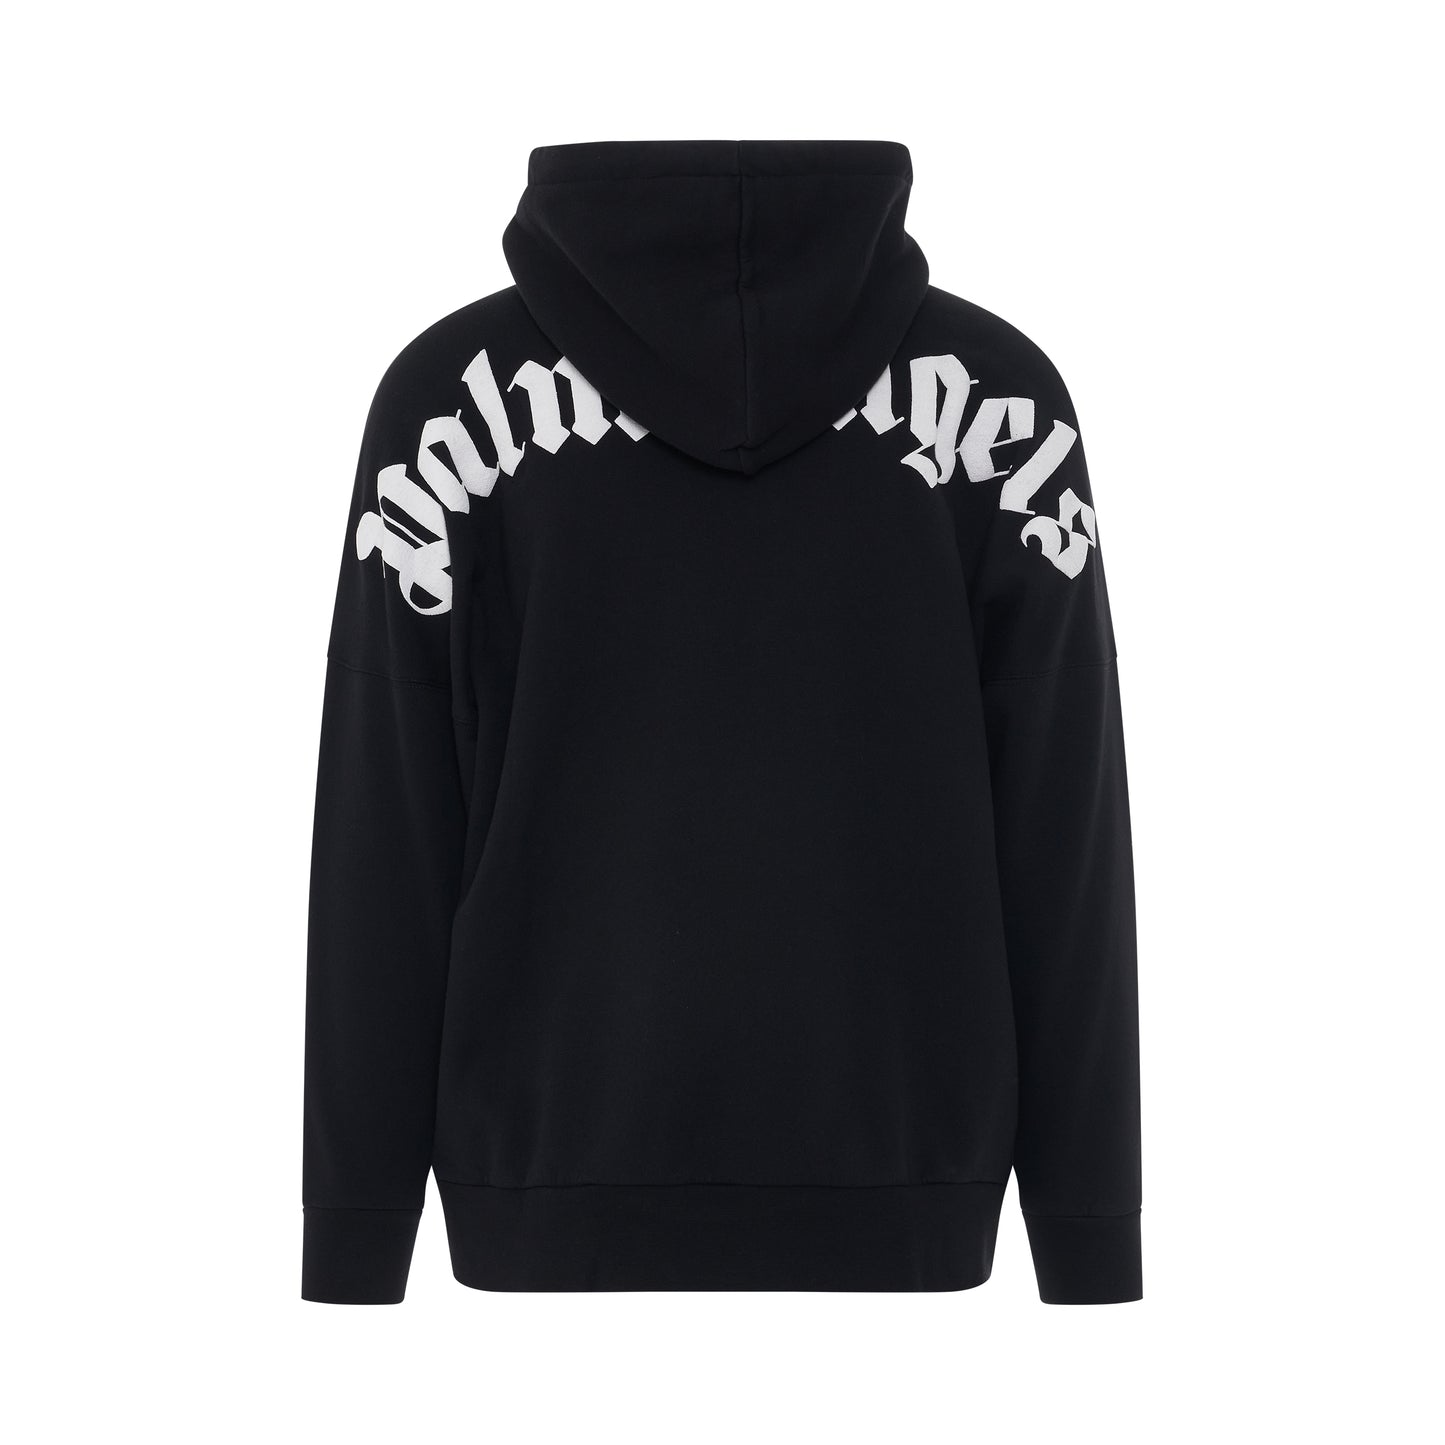 Classic Logo Over Hoodie in Black/White